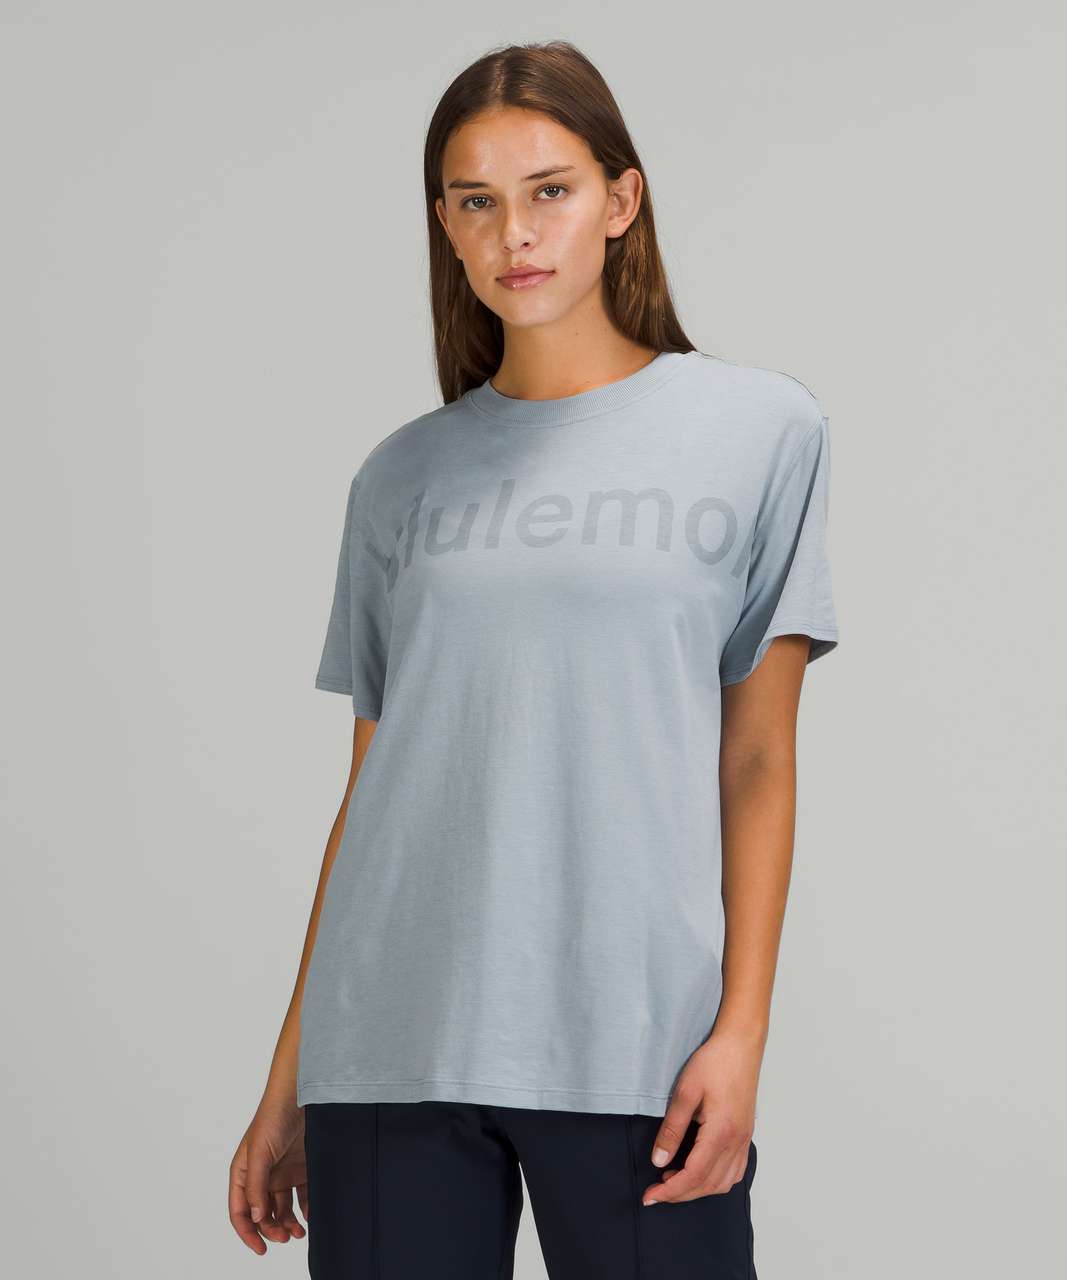 Lululemon All Yours Short Sleeve T-Shirt - Chambray